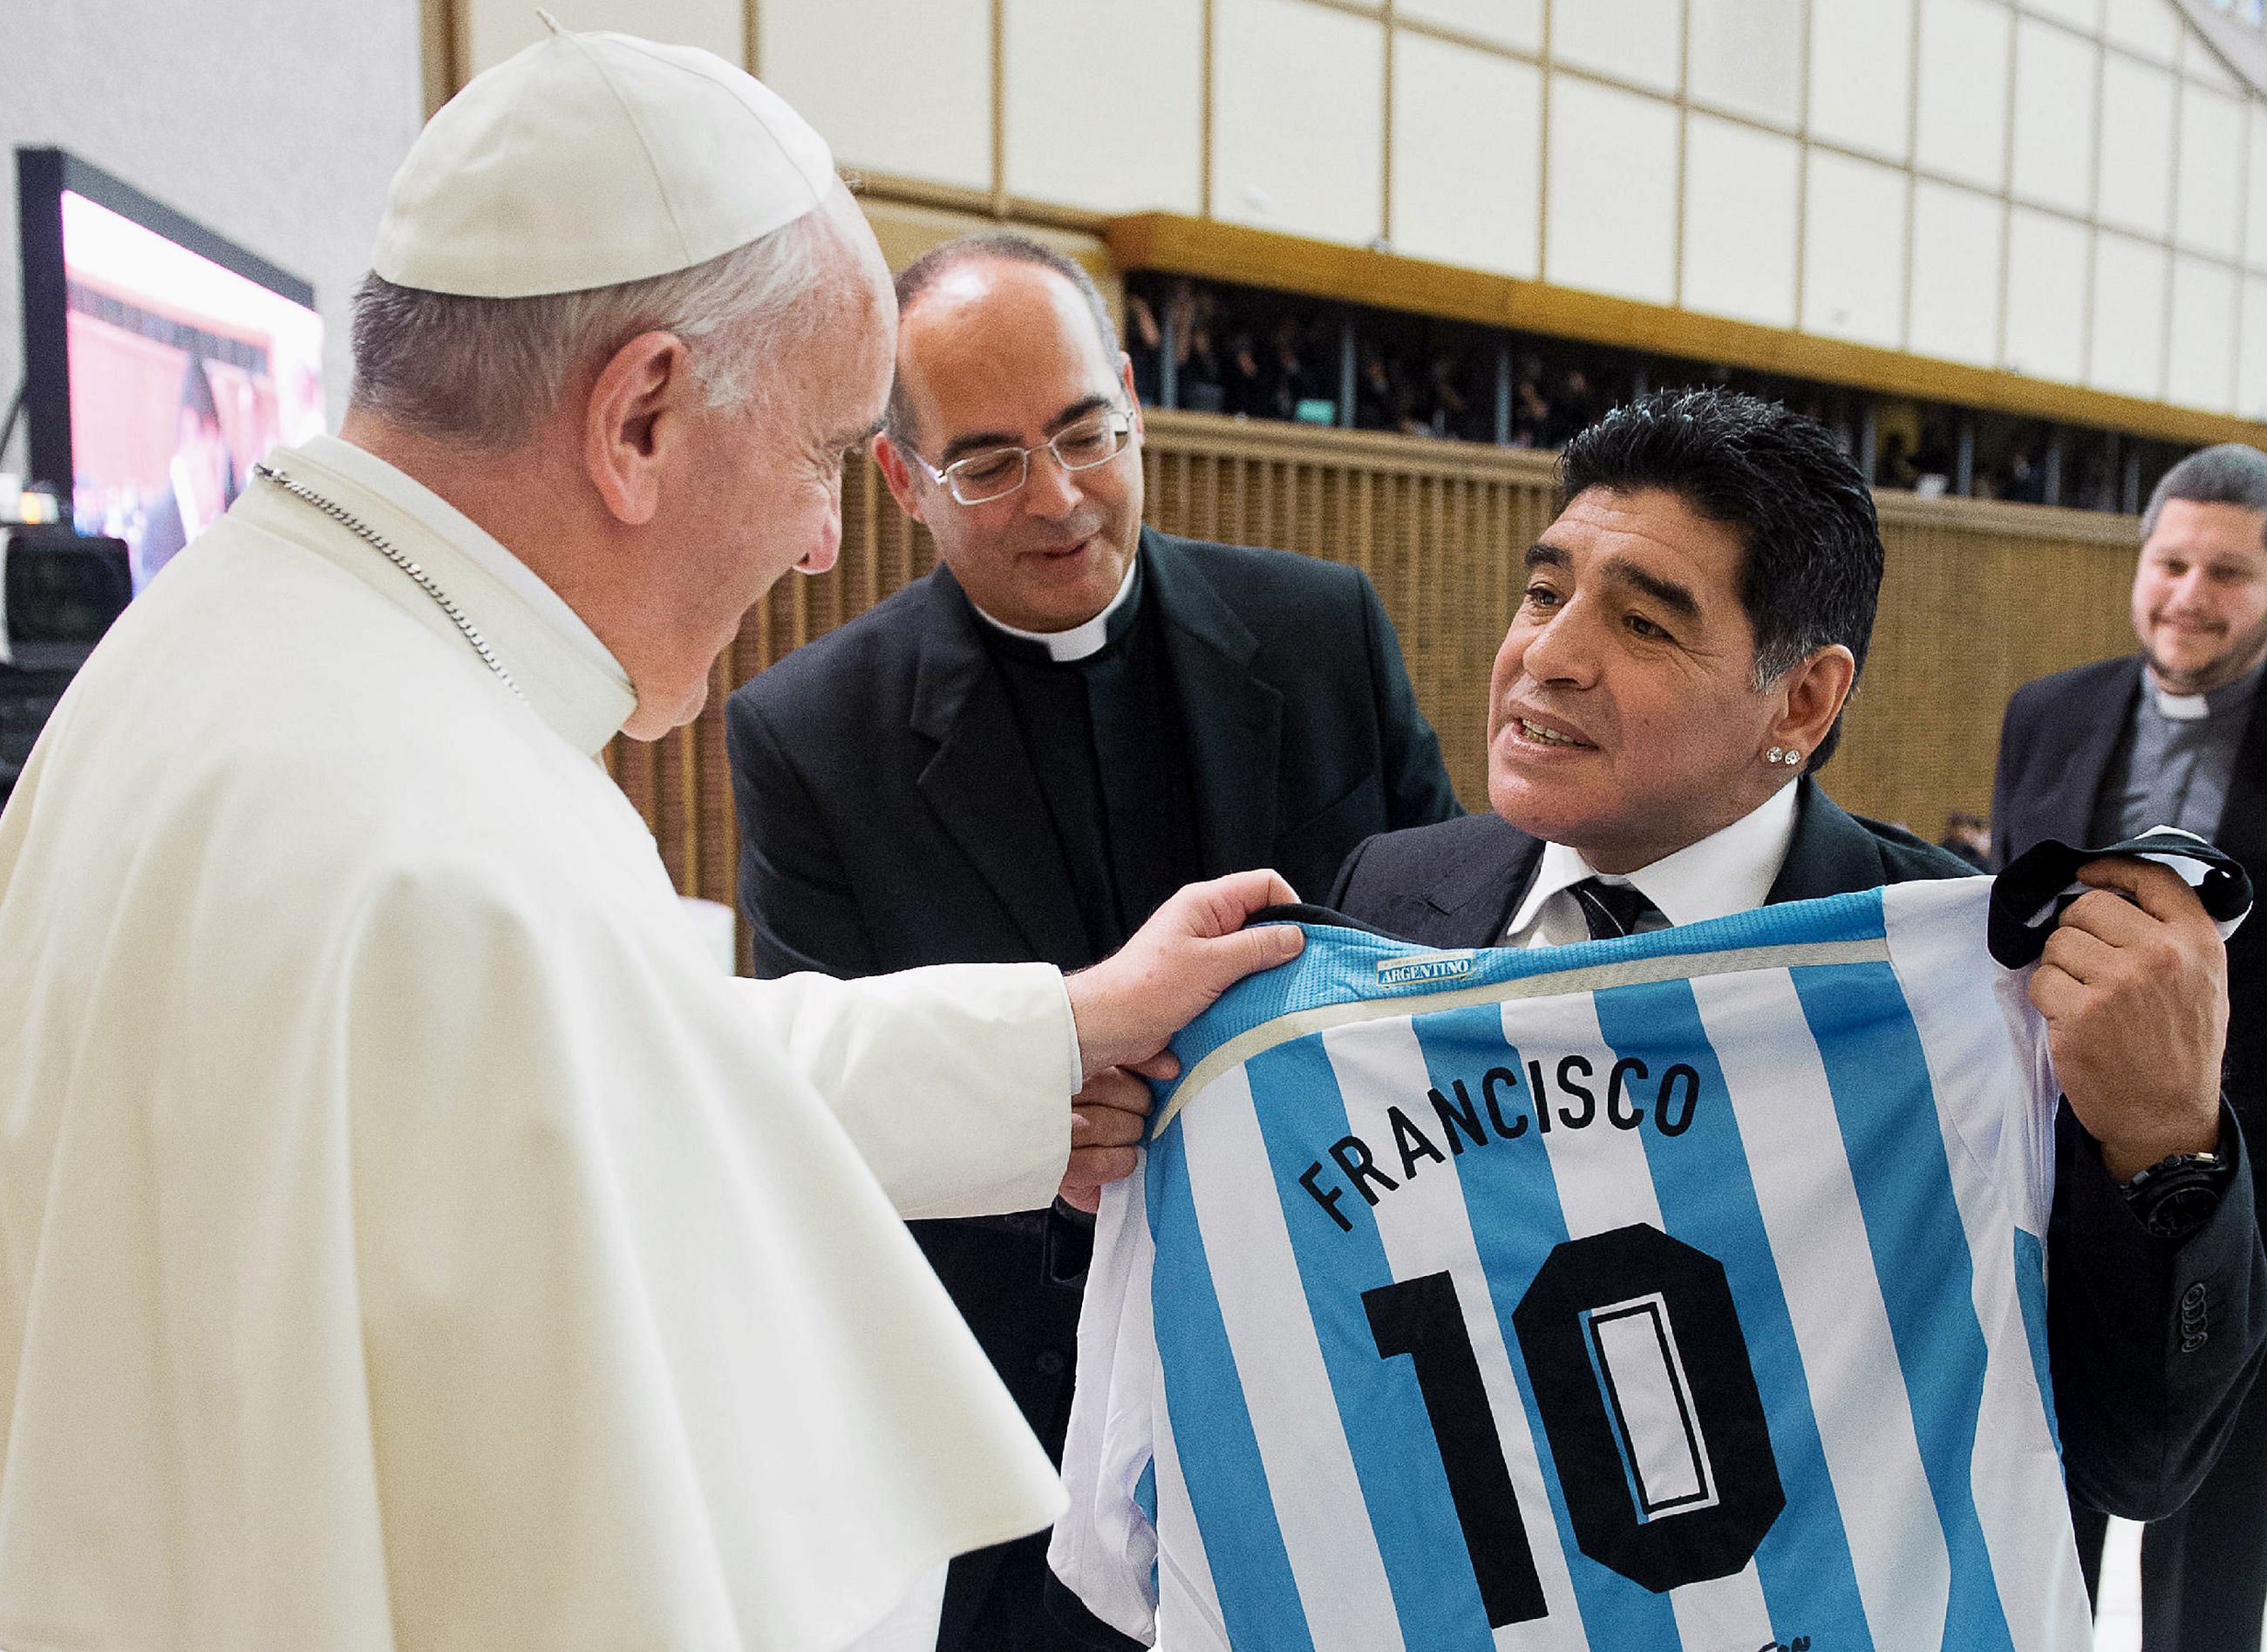 Argentinian former football player Diego Armando Maradona (R) presenting a personalised Argentina jersey to Pope Francis during a meeting with organizers, players and guests of the intereligious "match for peace" football game, in Paul VI hall at the Vatican. - The first pope from Latin America called Diego Maradona a "poet" on the field, as he weighed in on the joys of sport, in a 31-page interview about sports which took place in early December at the Vatican and was published on January 2, 2021 in Italy's La Gazzetta dello Sport. Credit: Vatican press office/AFP